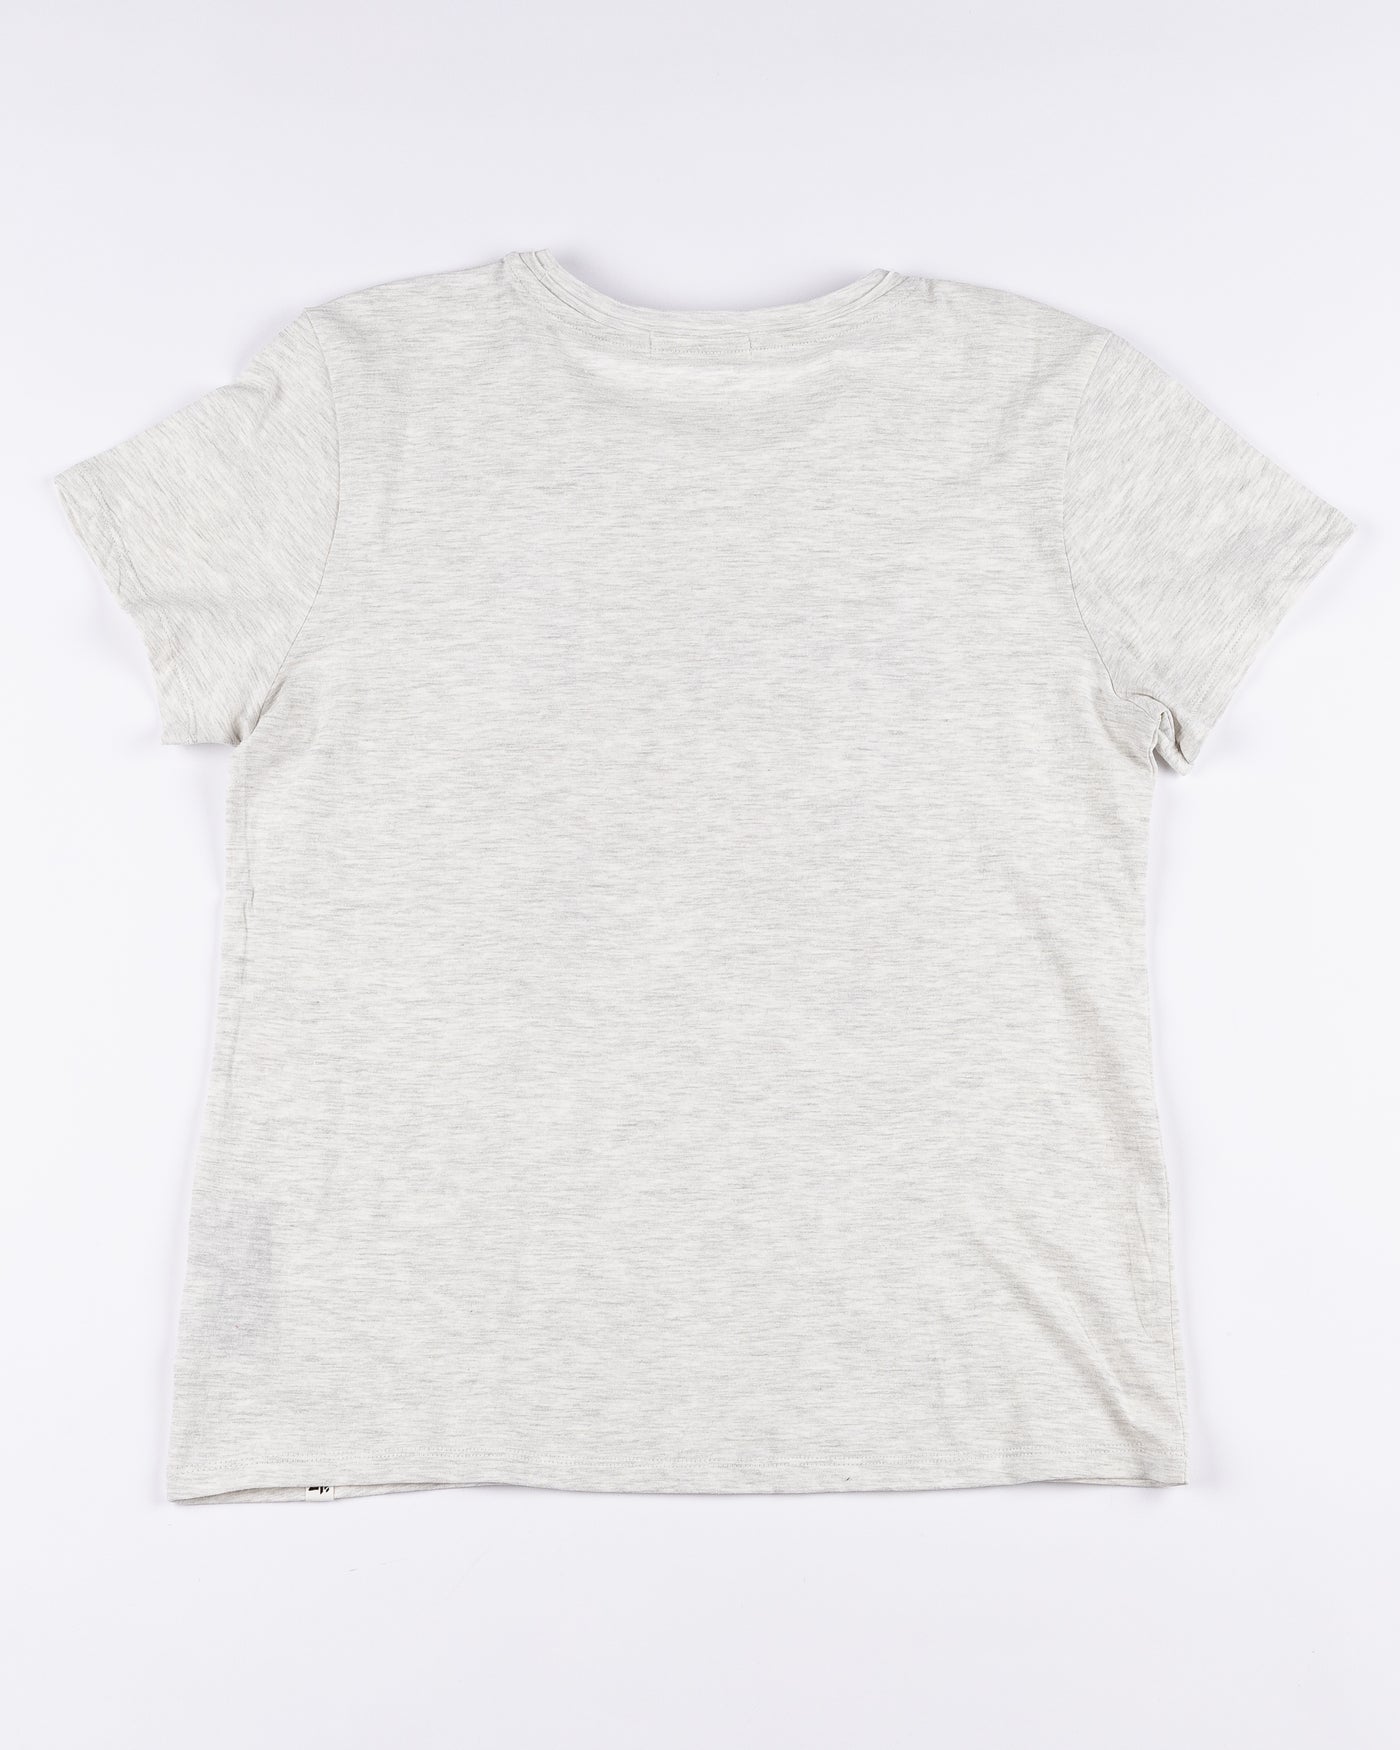 grey ladies '47 brand tee with Chicago Blackhawks wordmark and primary logo on front - back lay flat